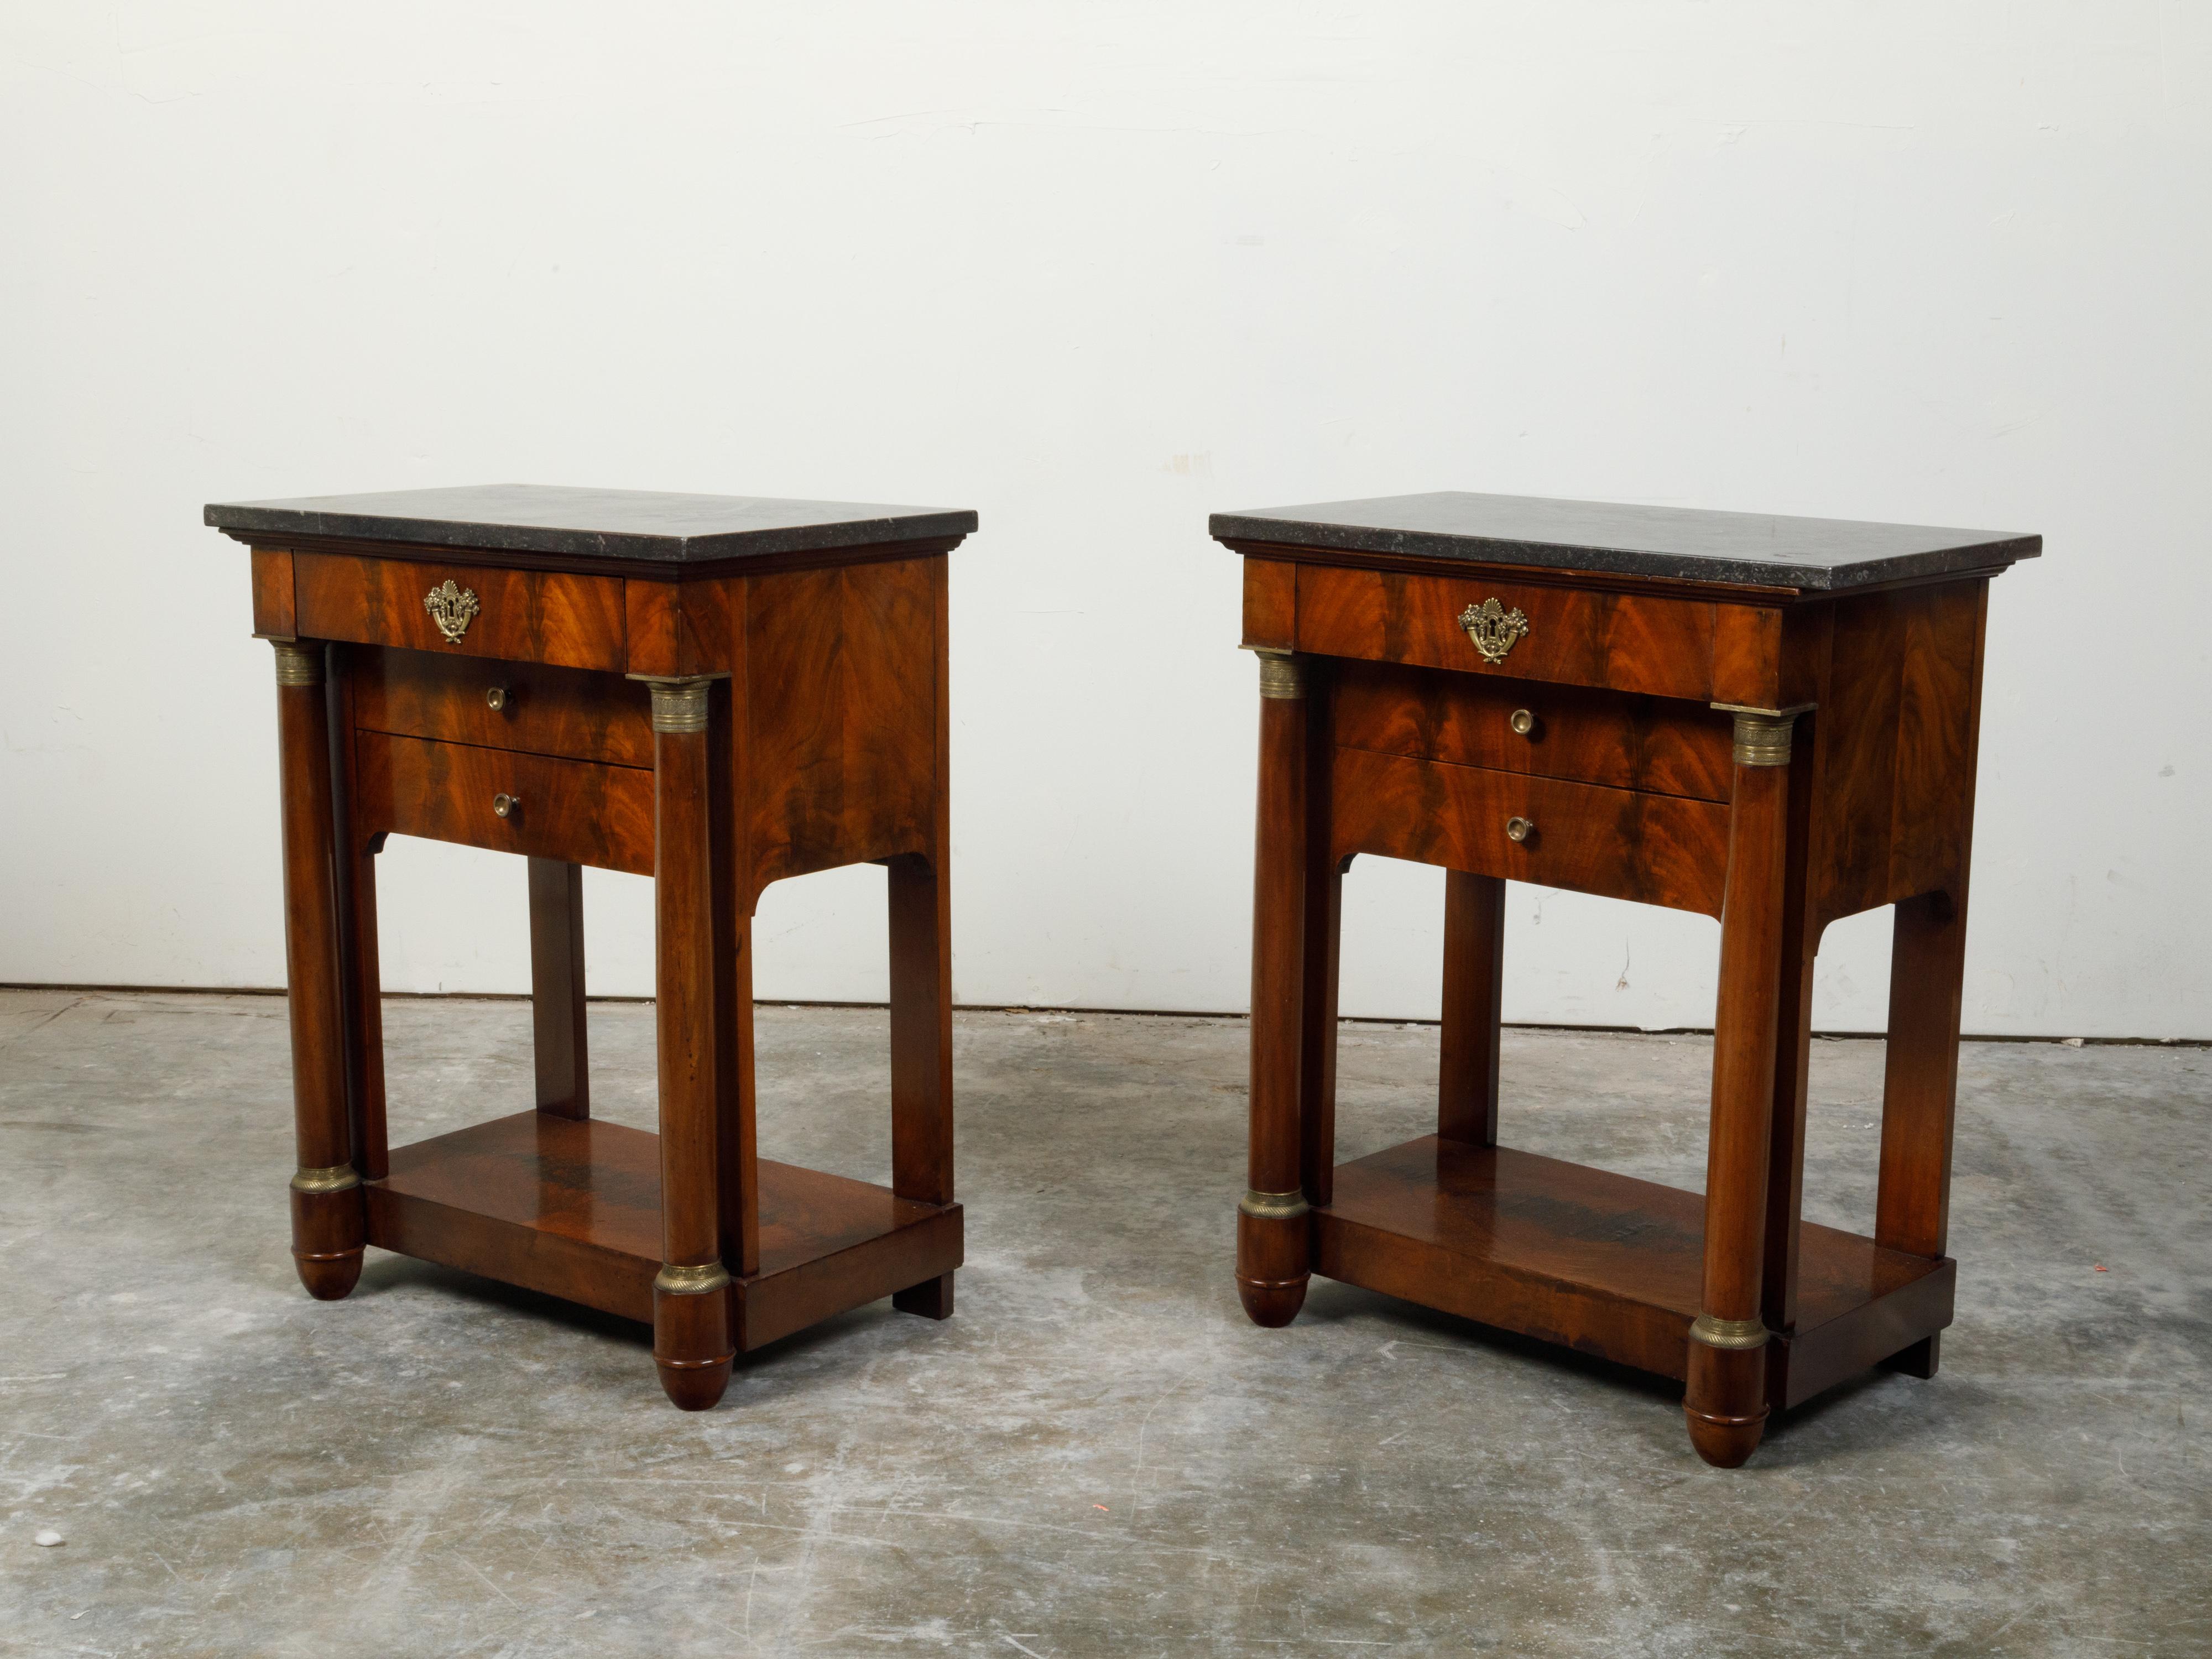 Veneer French Empire Early 19th Century Walnut Console Tables with Grey Marble Tops For Sale